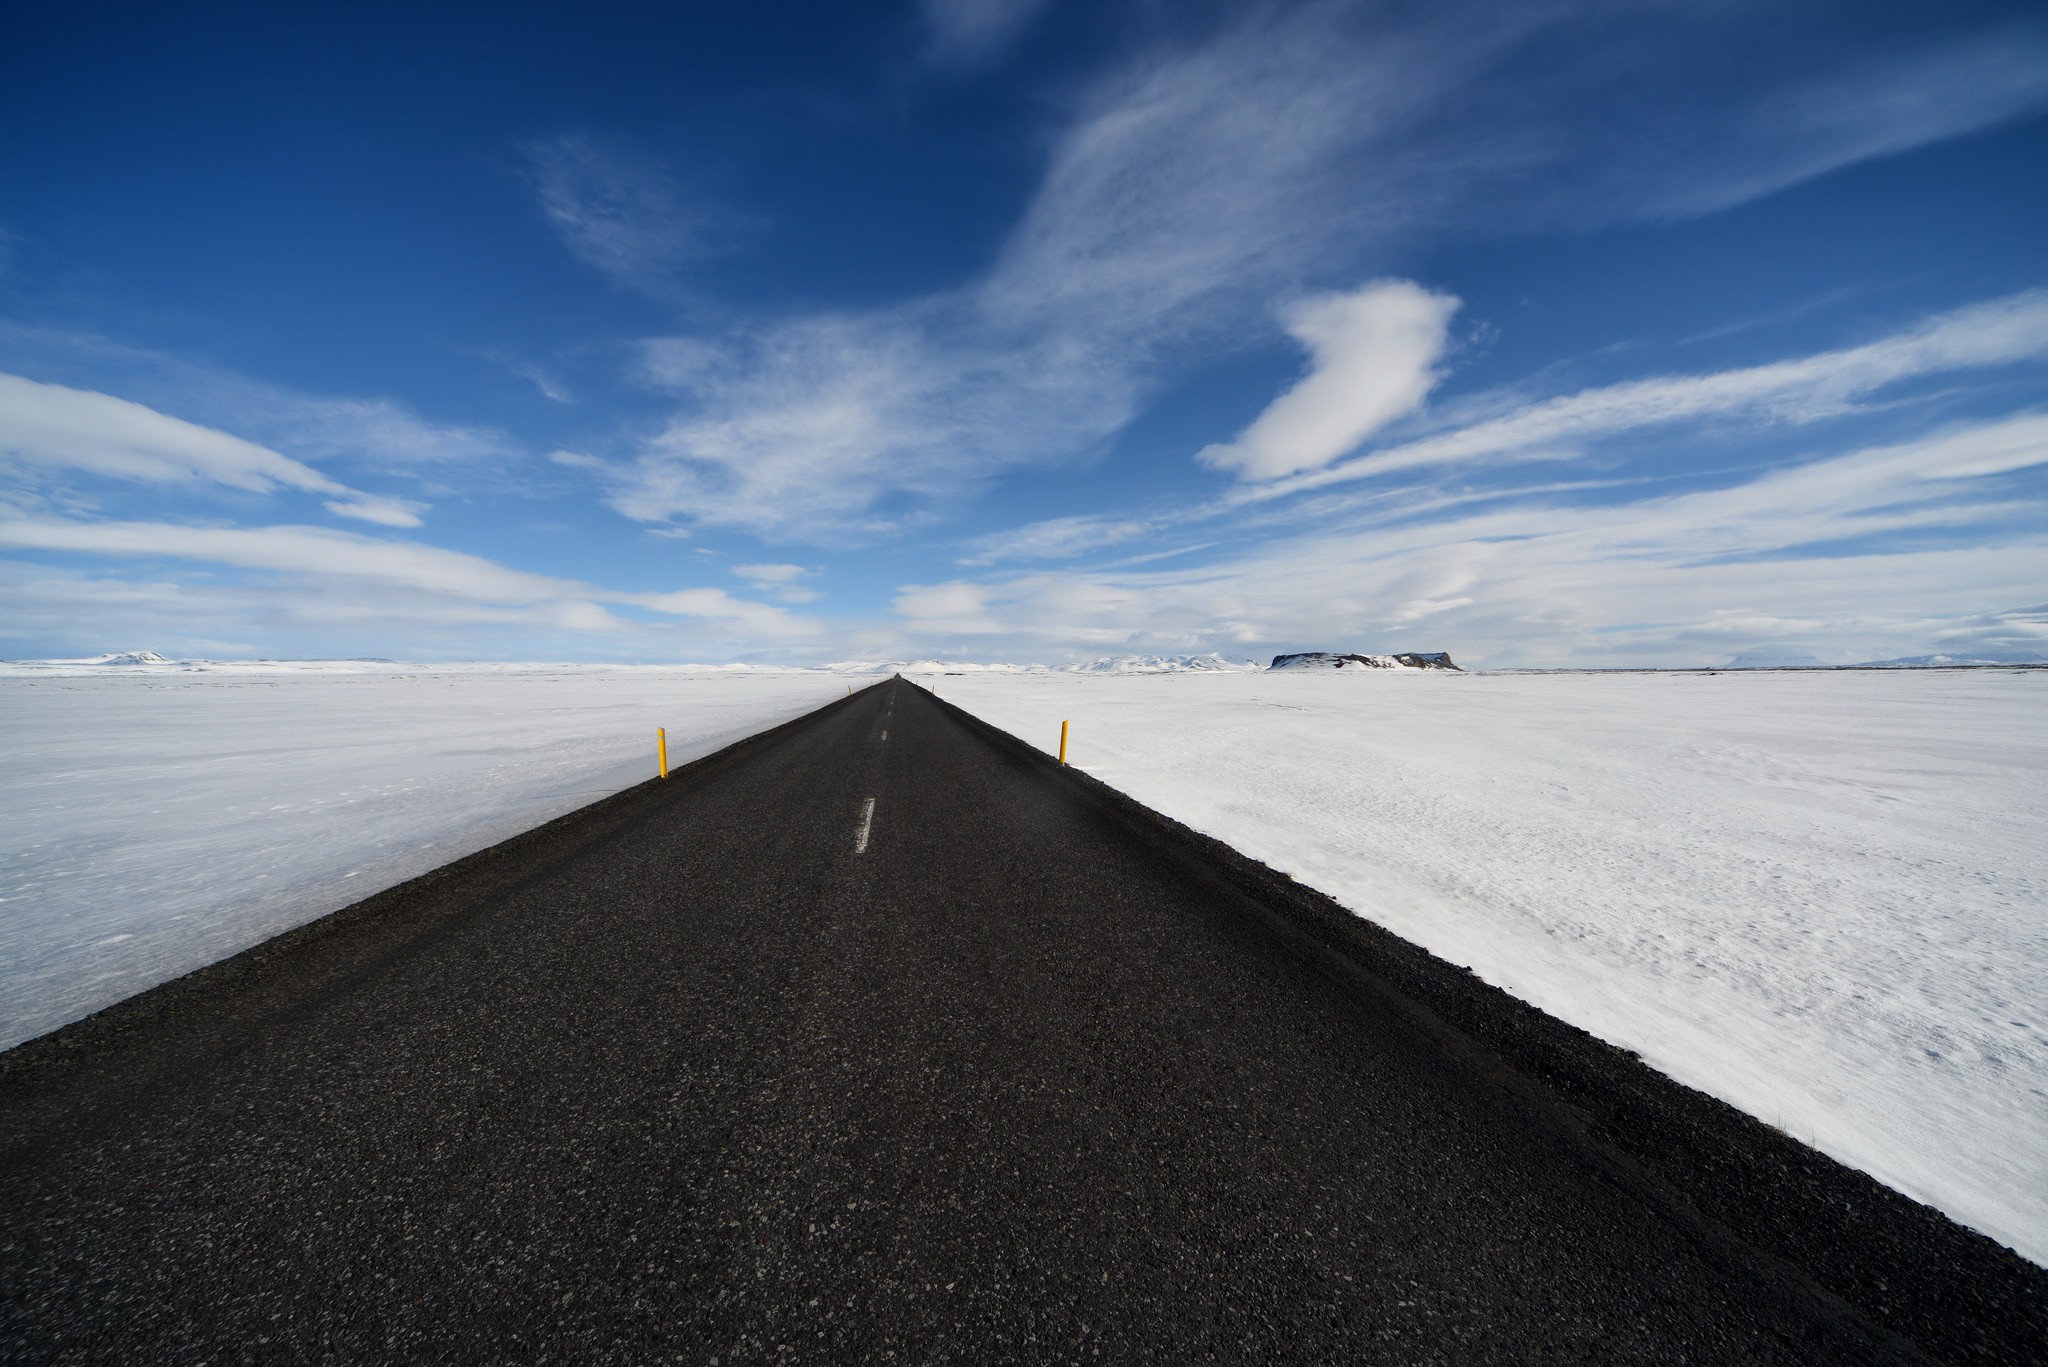 General 2048x1367 road long road winter snow plains asphalt cold outdoors sky ice